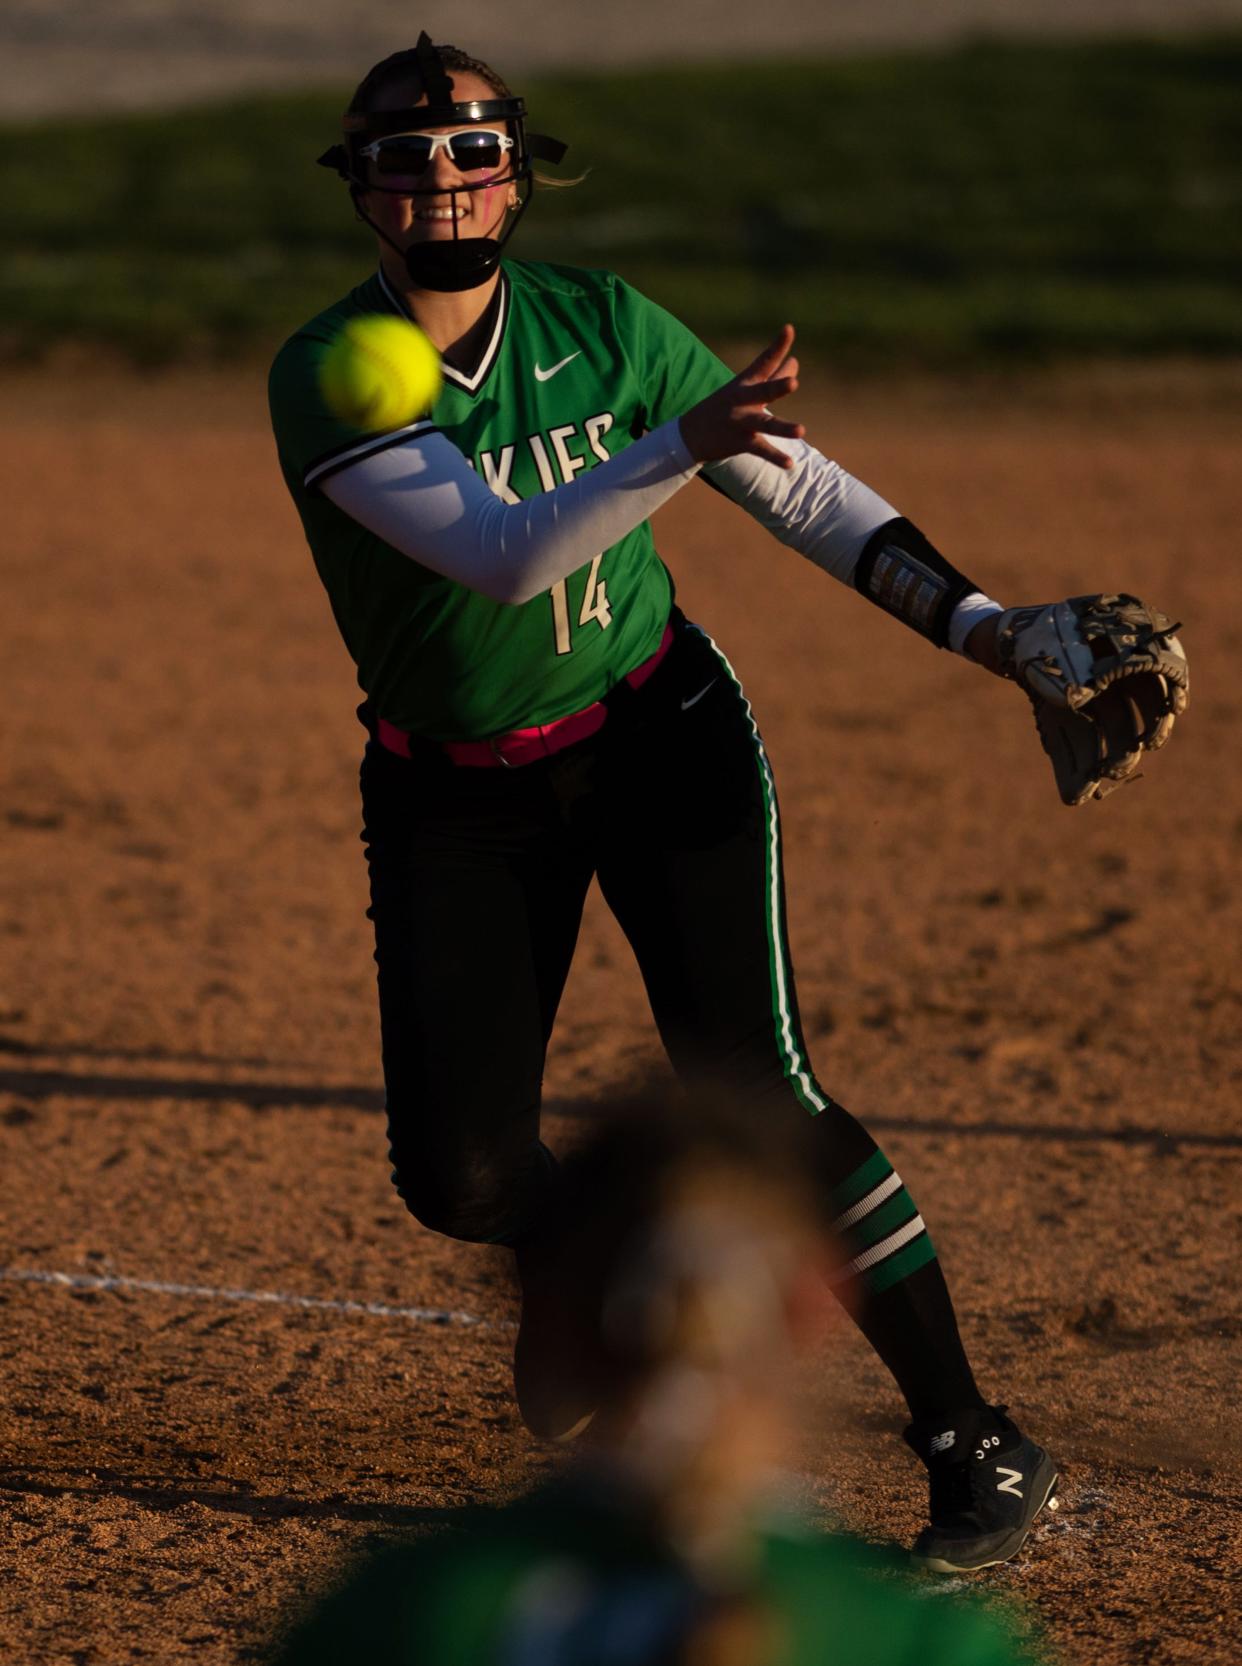 North's Hannah Wilke throws to first base to get the Boonville batter out at Mike Wilson Field Tuesday evening, March 28, 2023.